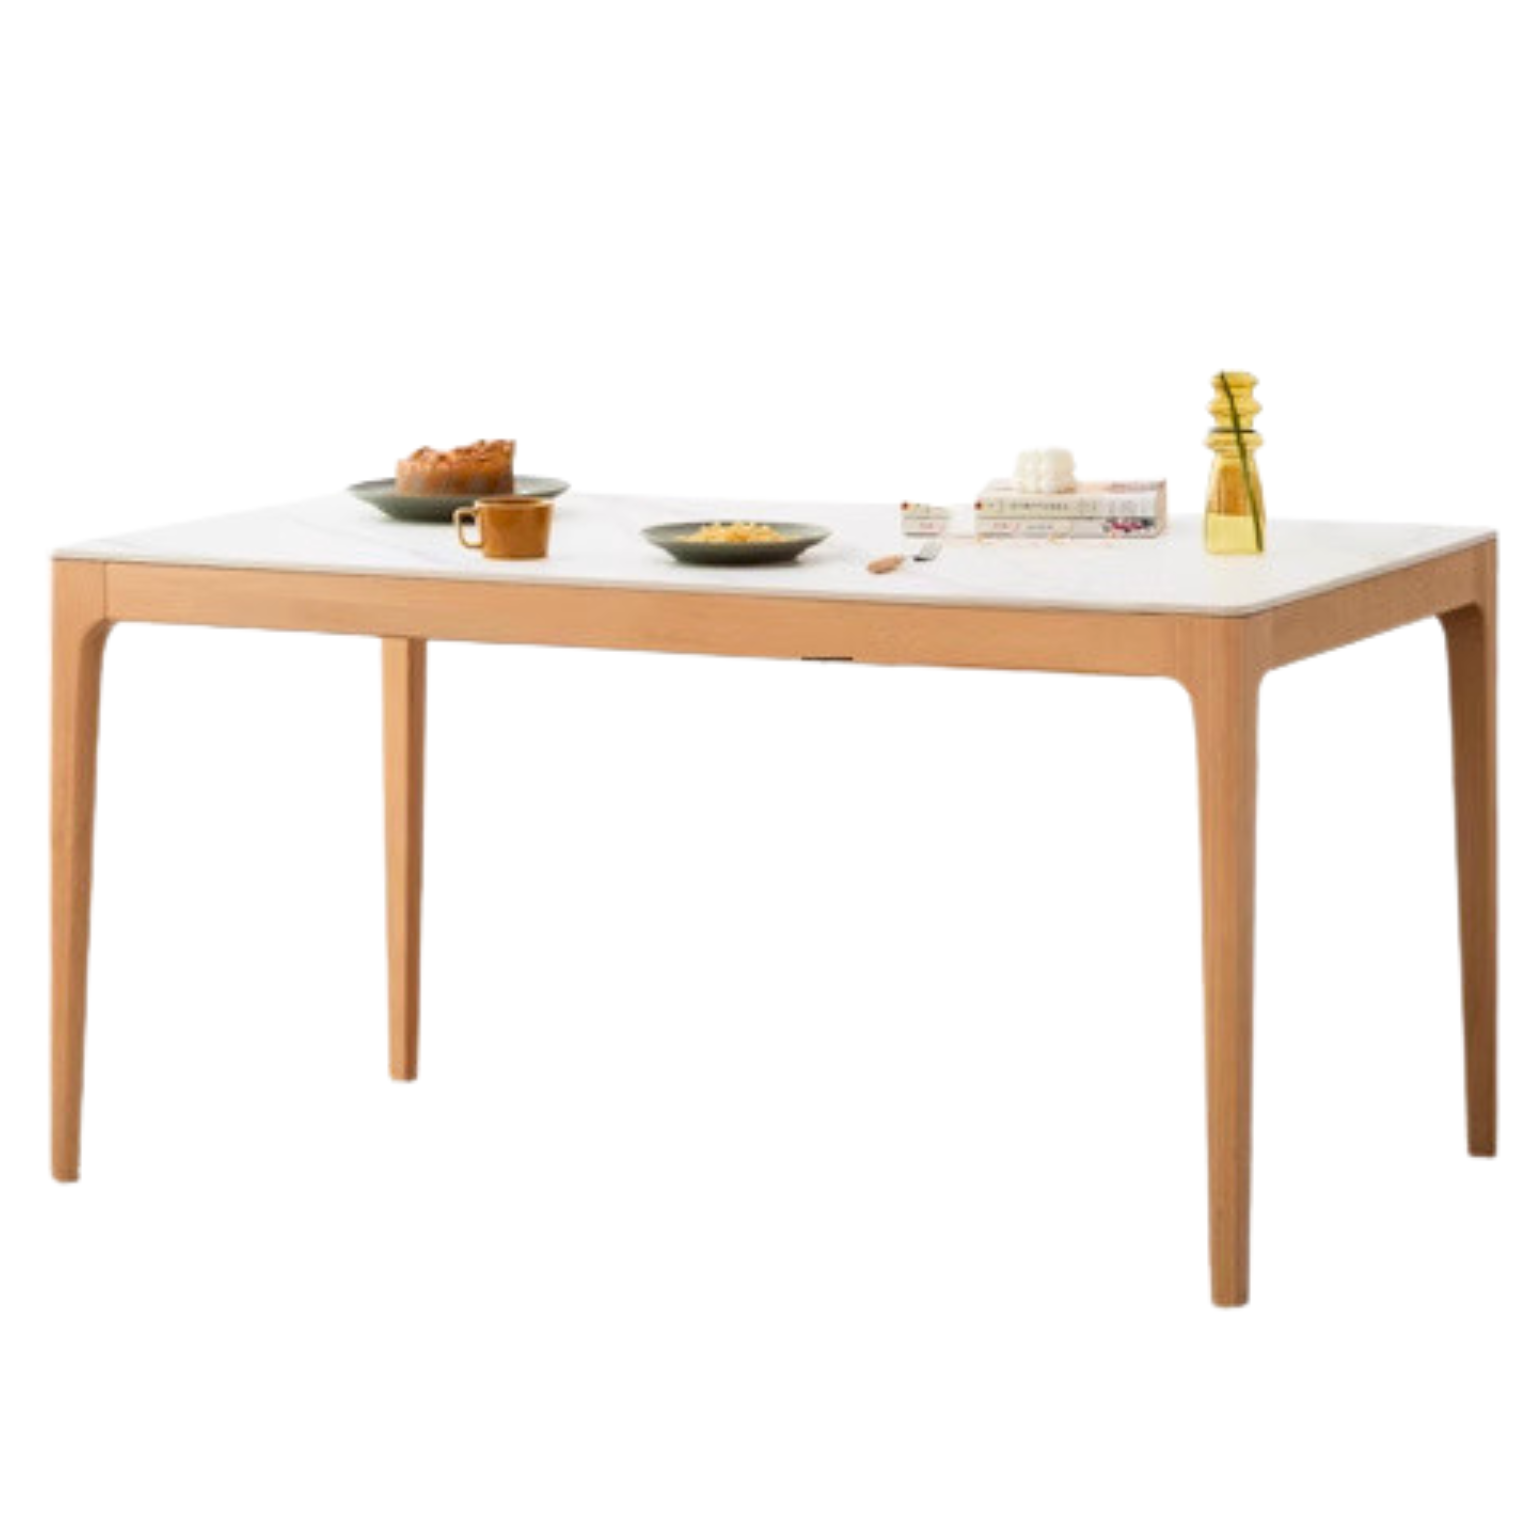 Beech solid wood slate dining table rectangular -